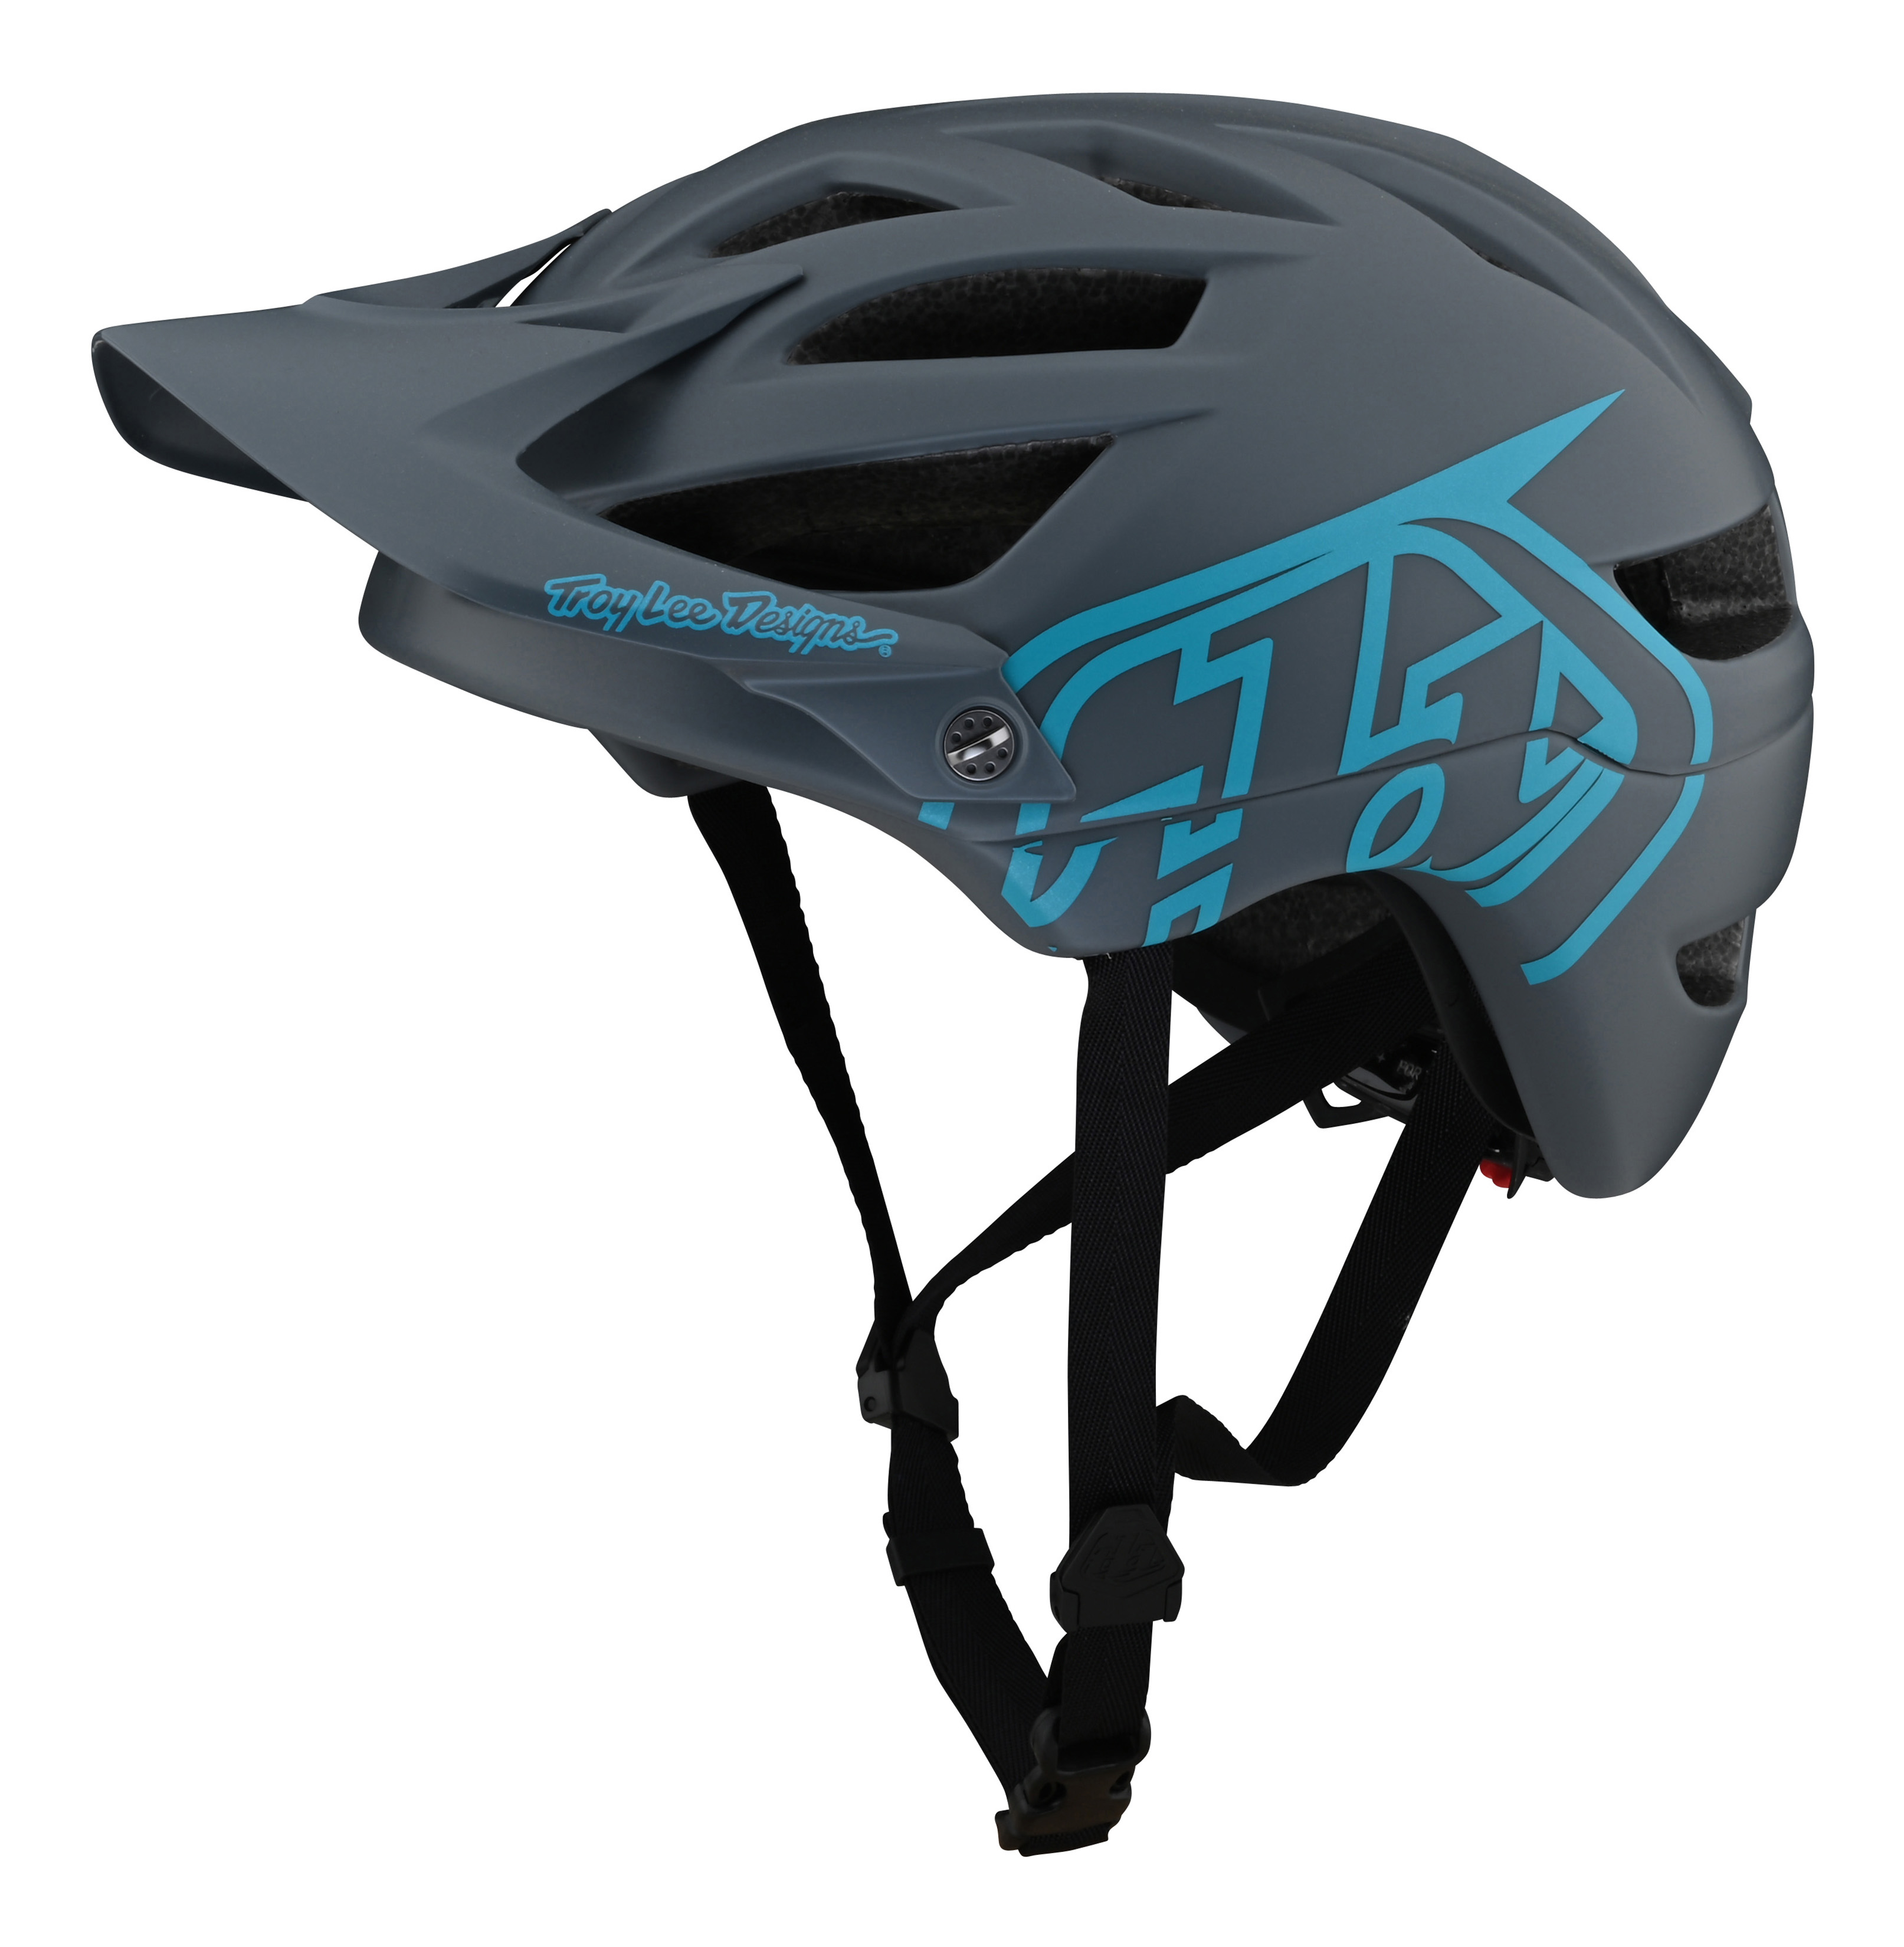 Troy Lee Designs A1 MIPS Helm Classic Black/red 2020 Fahrradhelm